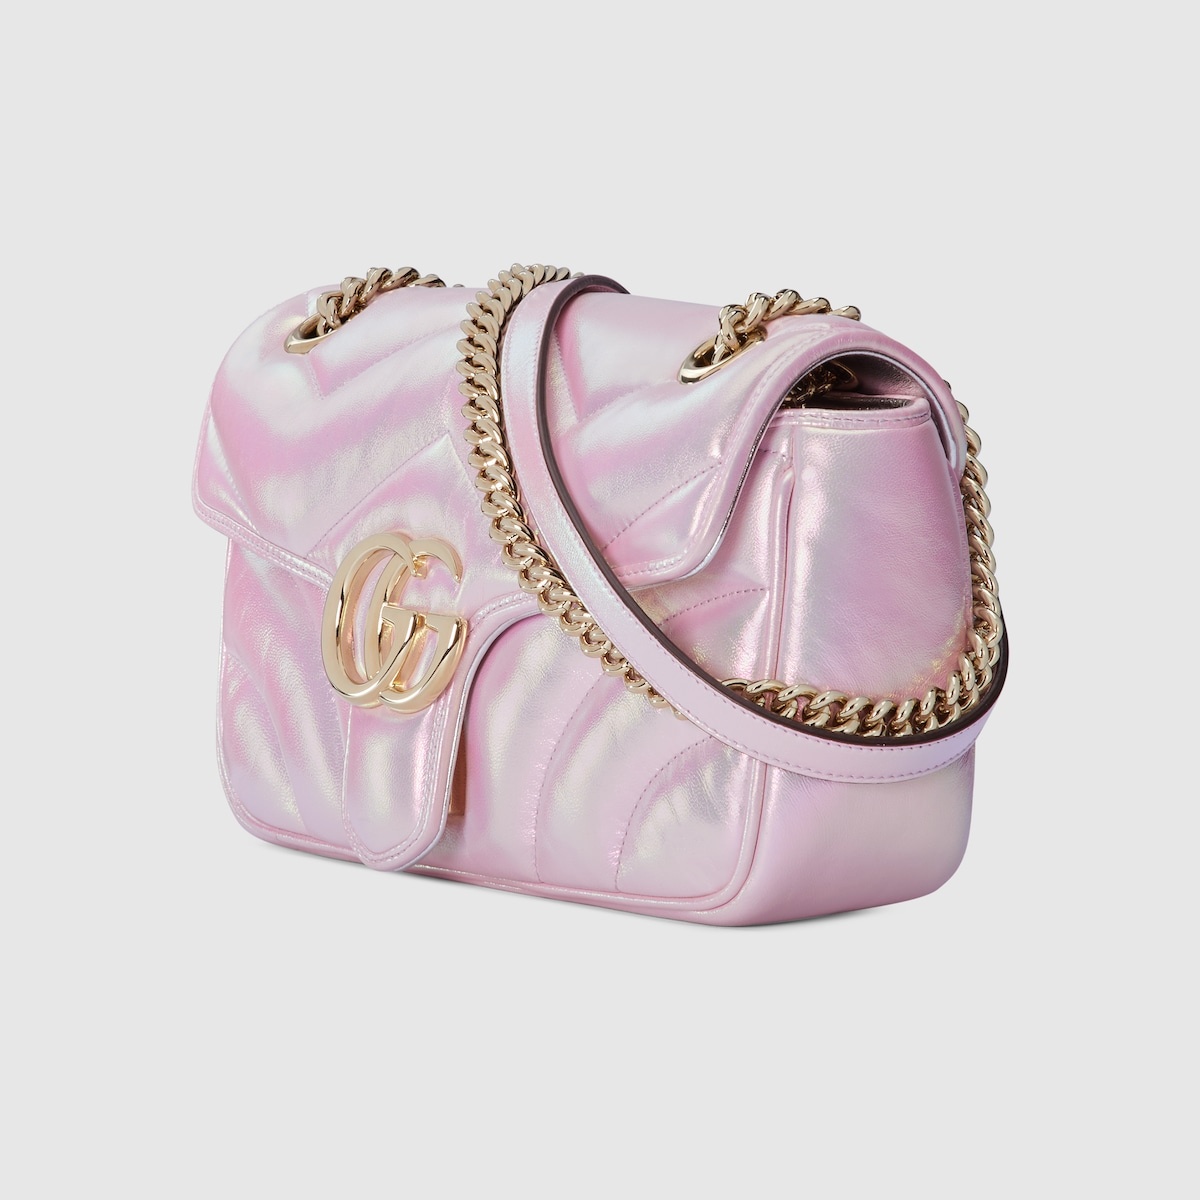 GG Marmont small shoulder bag - 2